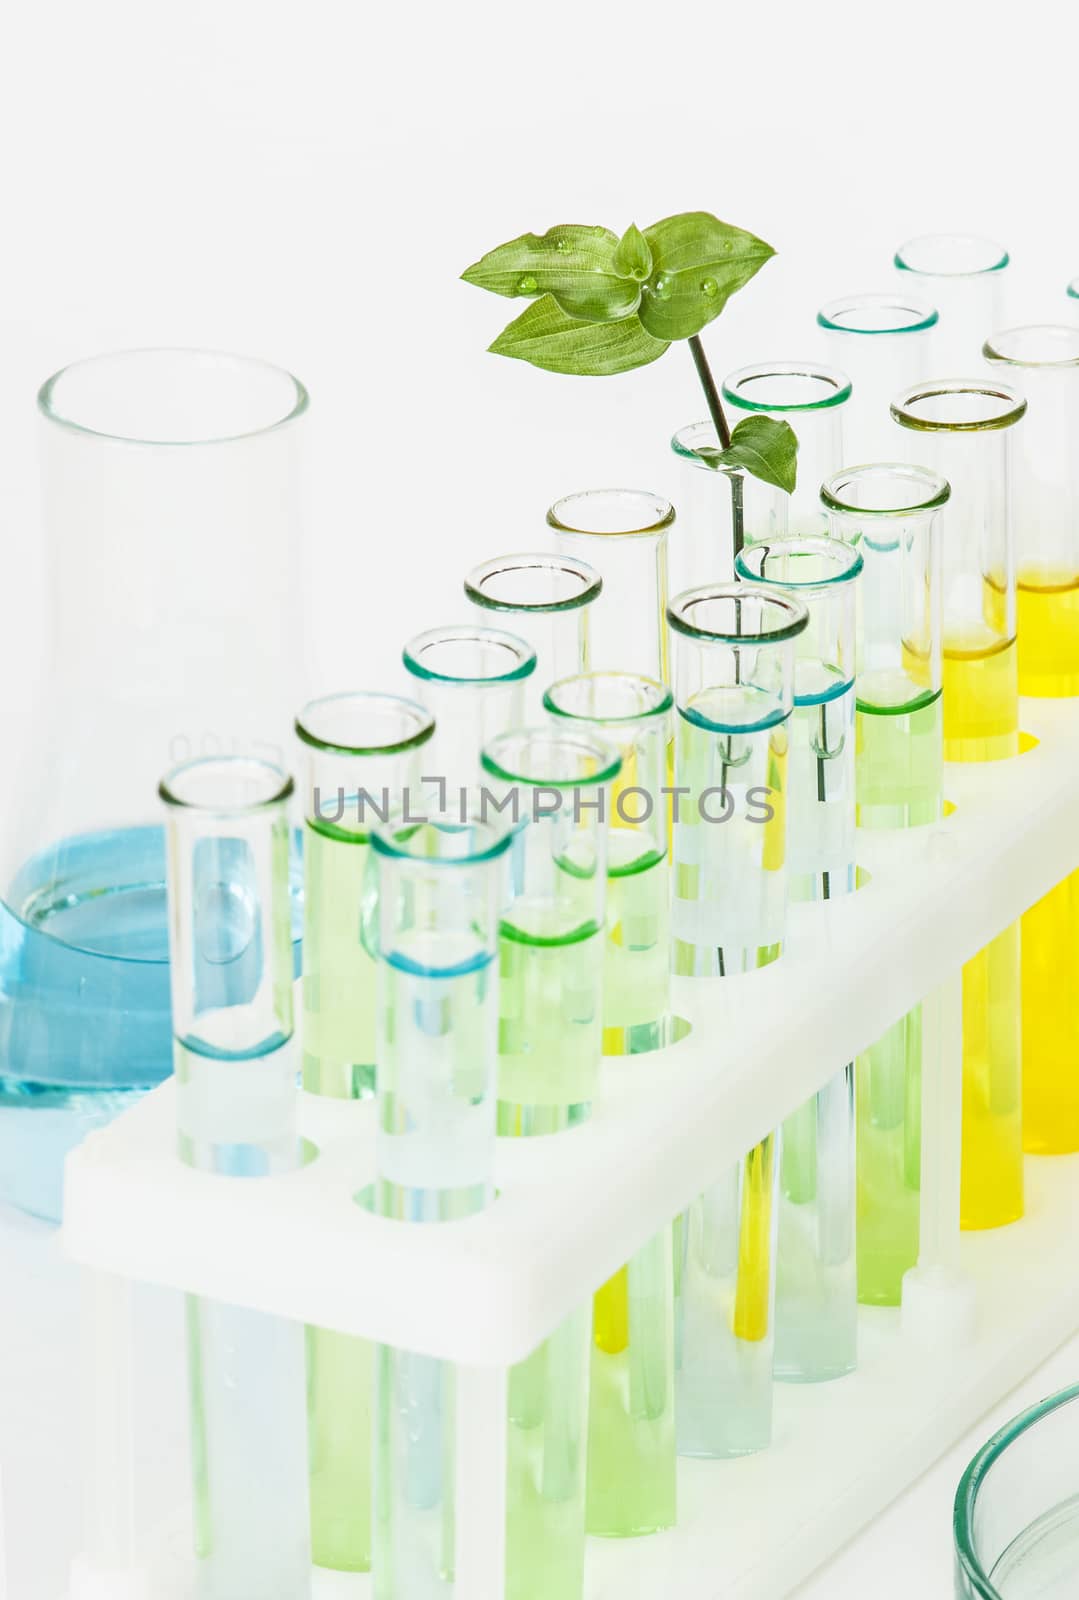 Sprout with green leaves in vitro and laboratory glassware